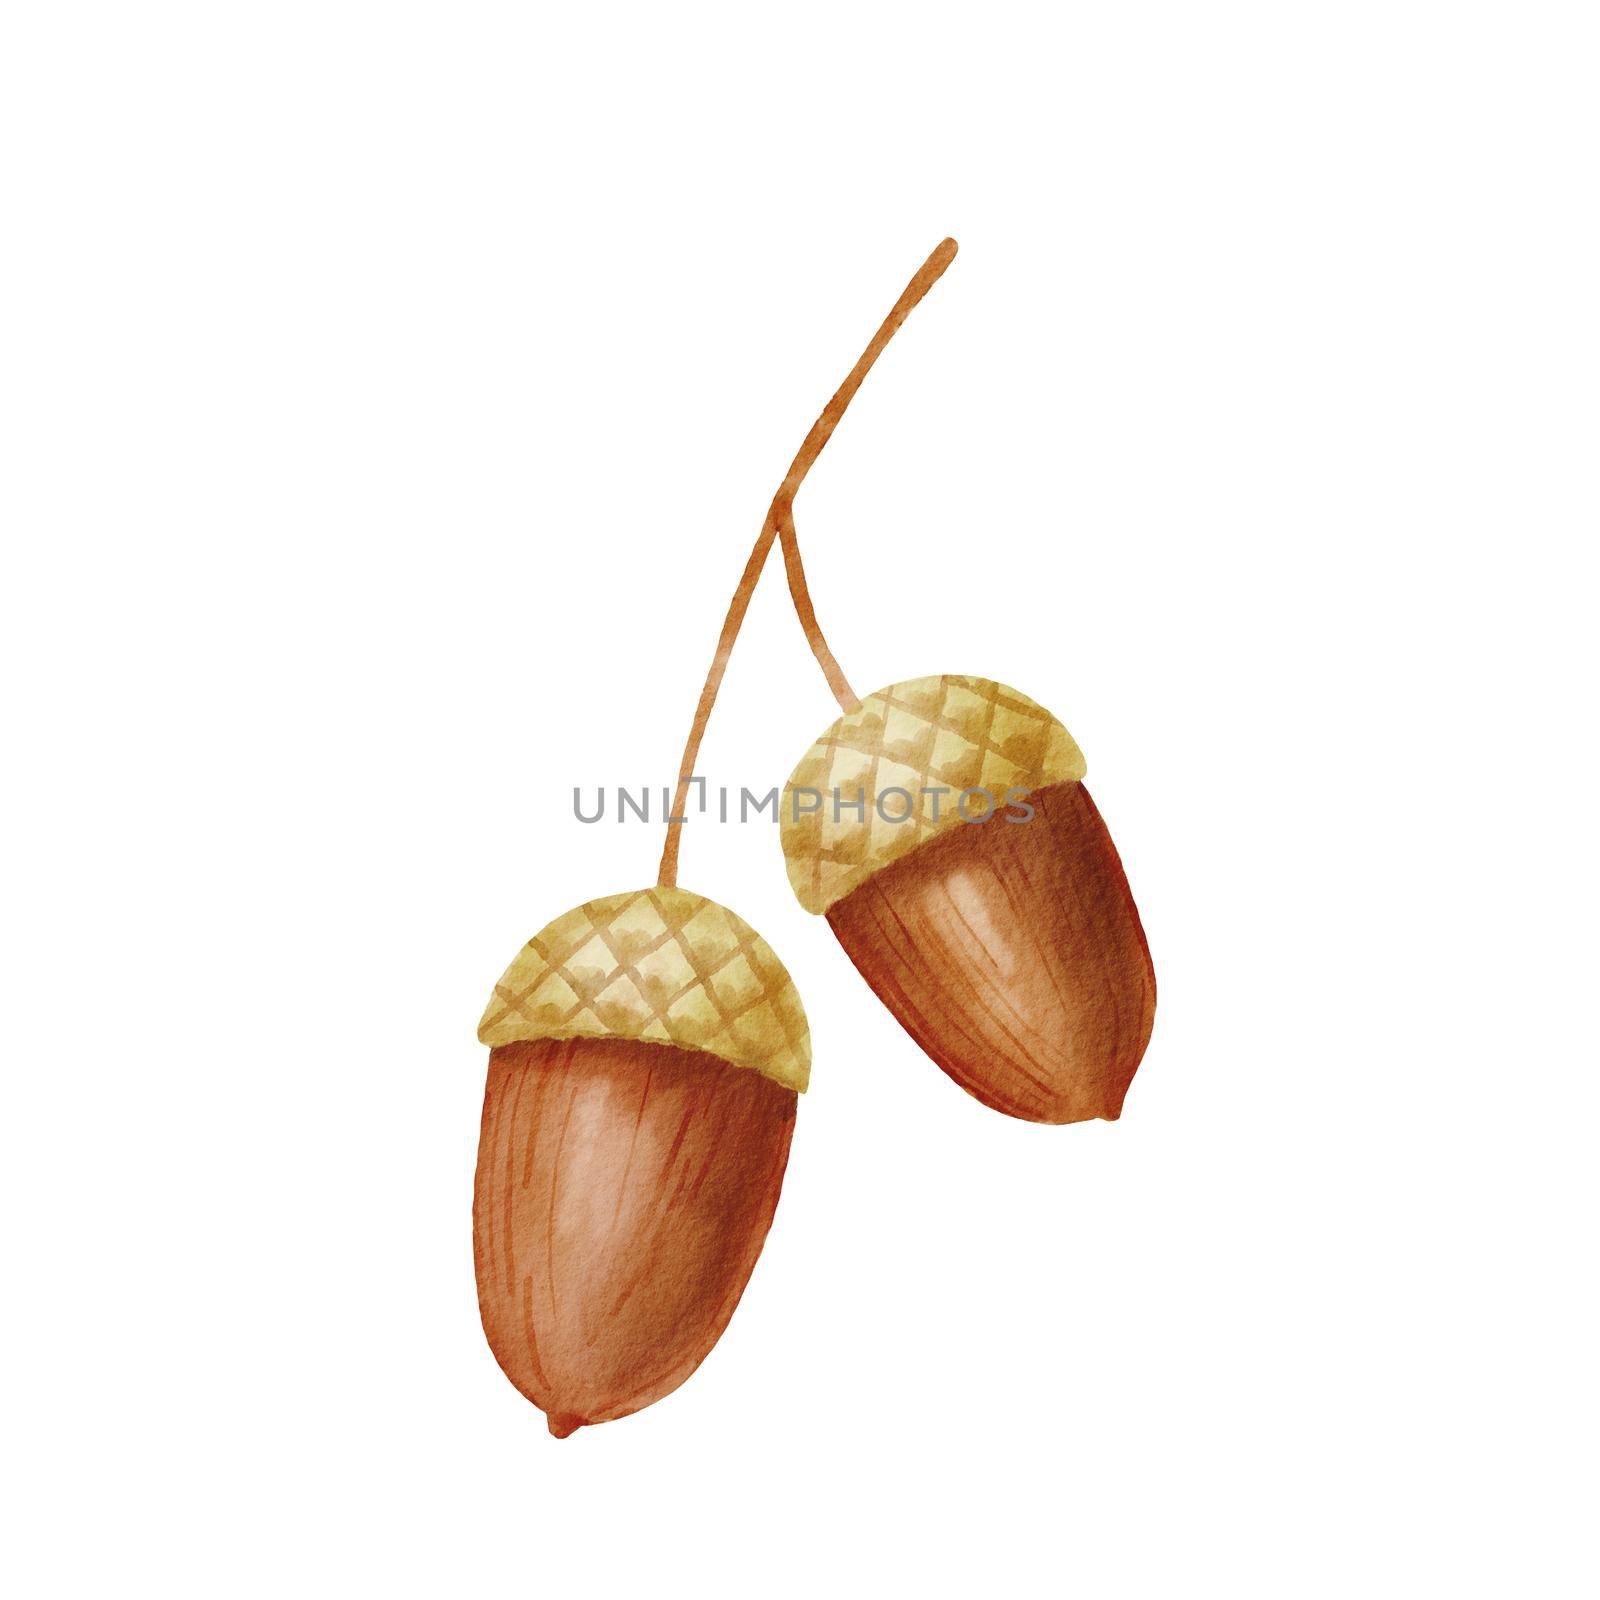 Watercolor colorful cute acorn. Autumn design element. Hand drawn fall illustration isolated on white